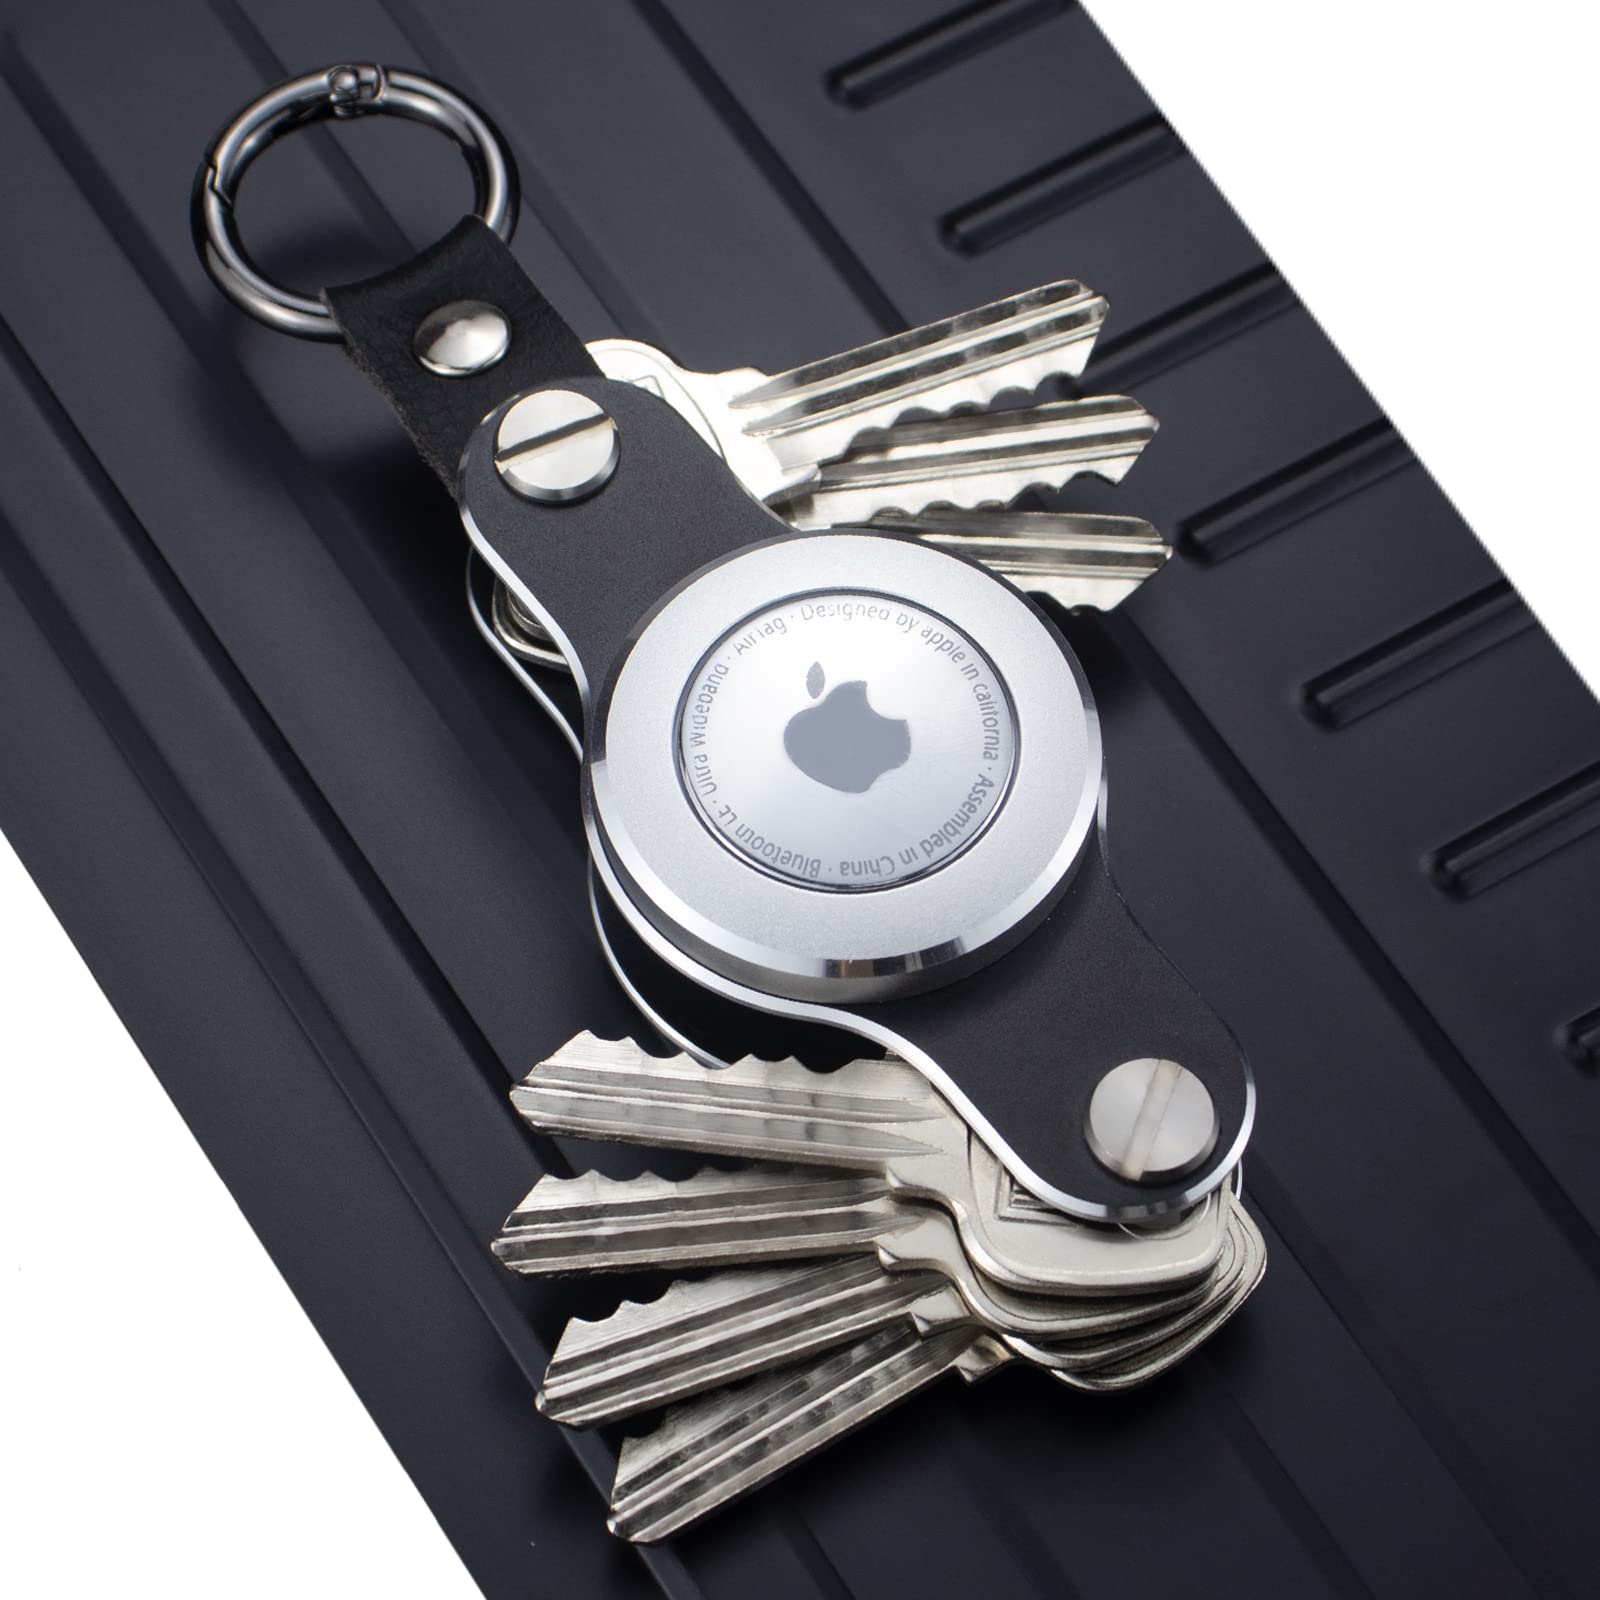 Metal Airtag Keychain, Compact Key Organizer for Apple Airtag, Slim Key Holder with Airtag Case, Aluminum AirTag Organizer Keychain for Men, Anti-Theft AirTag Holder for Secures Keys